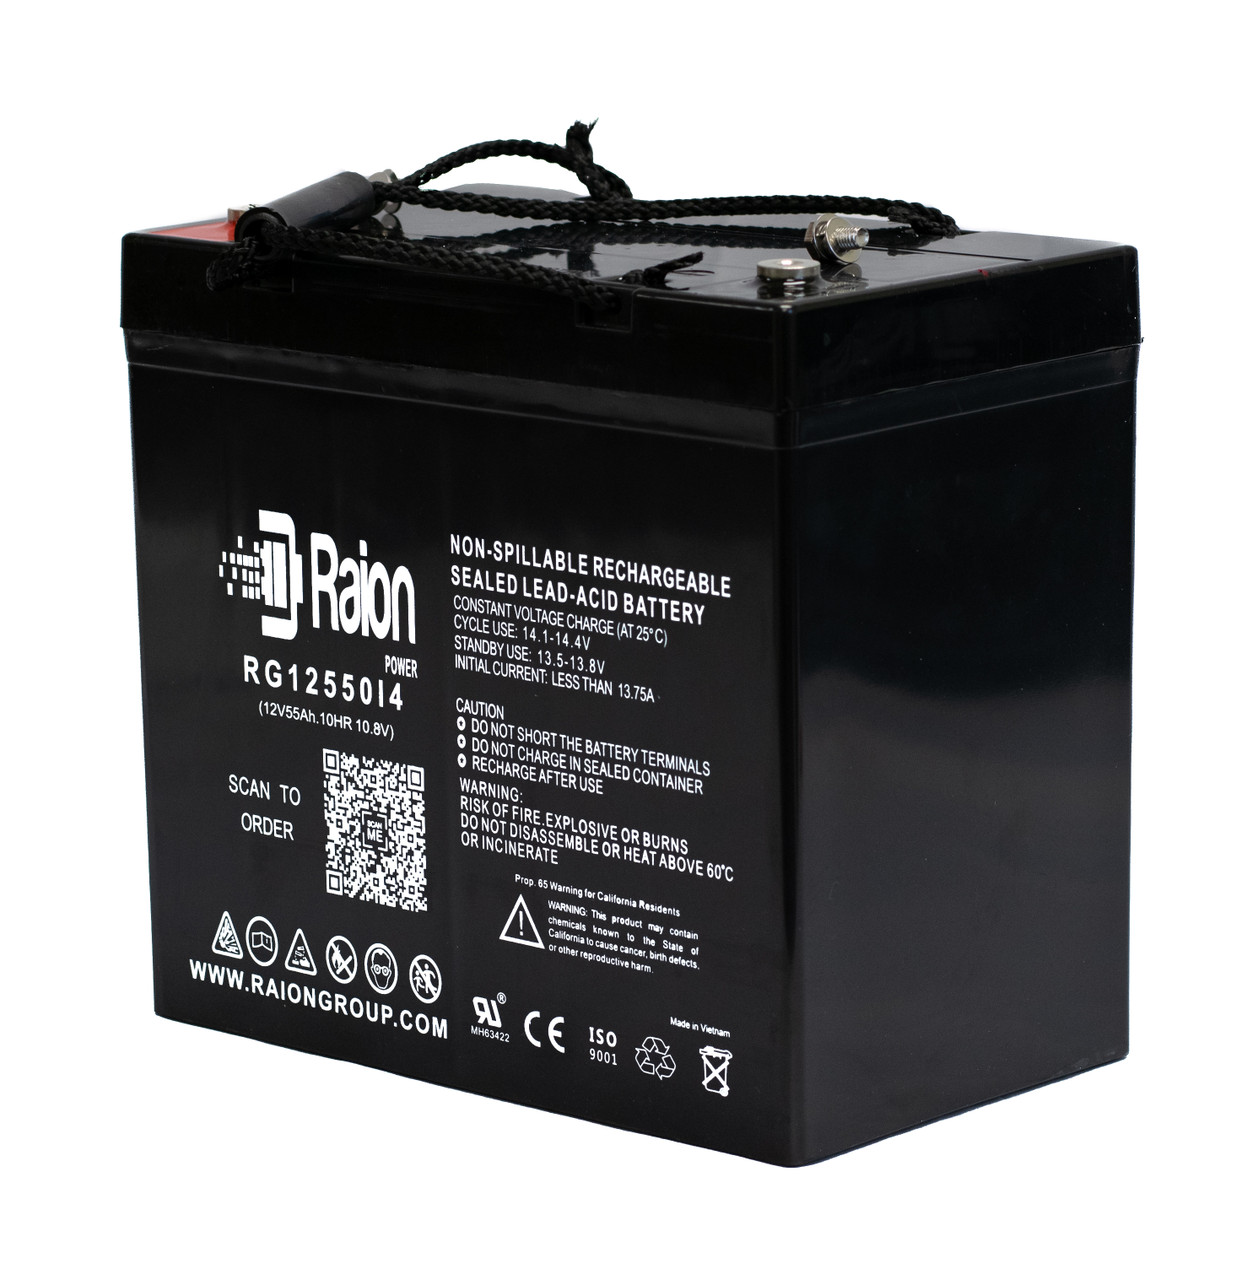 Raion Power Replacement 12V 55Ah Battery for Strident AGM GP12-55 - 1 Pack